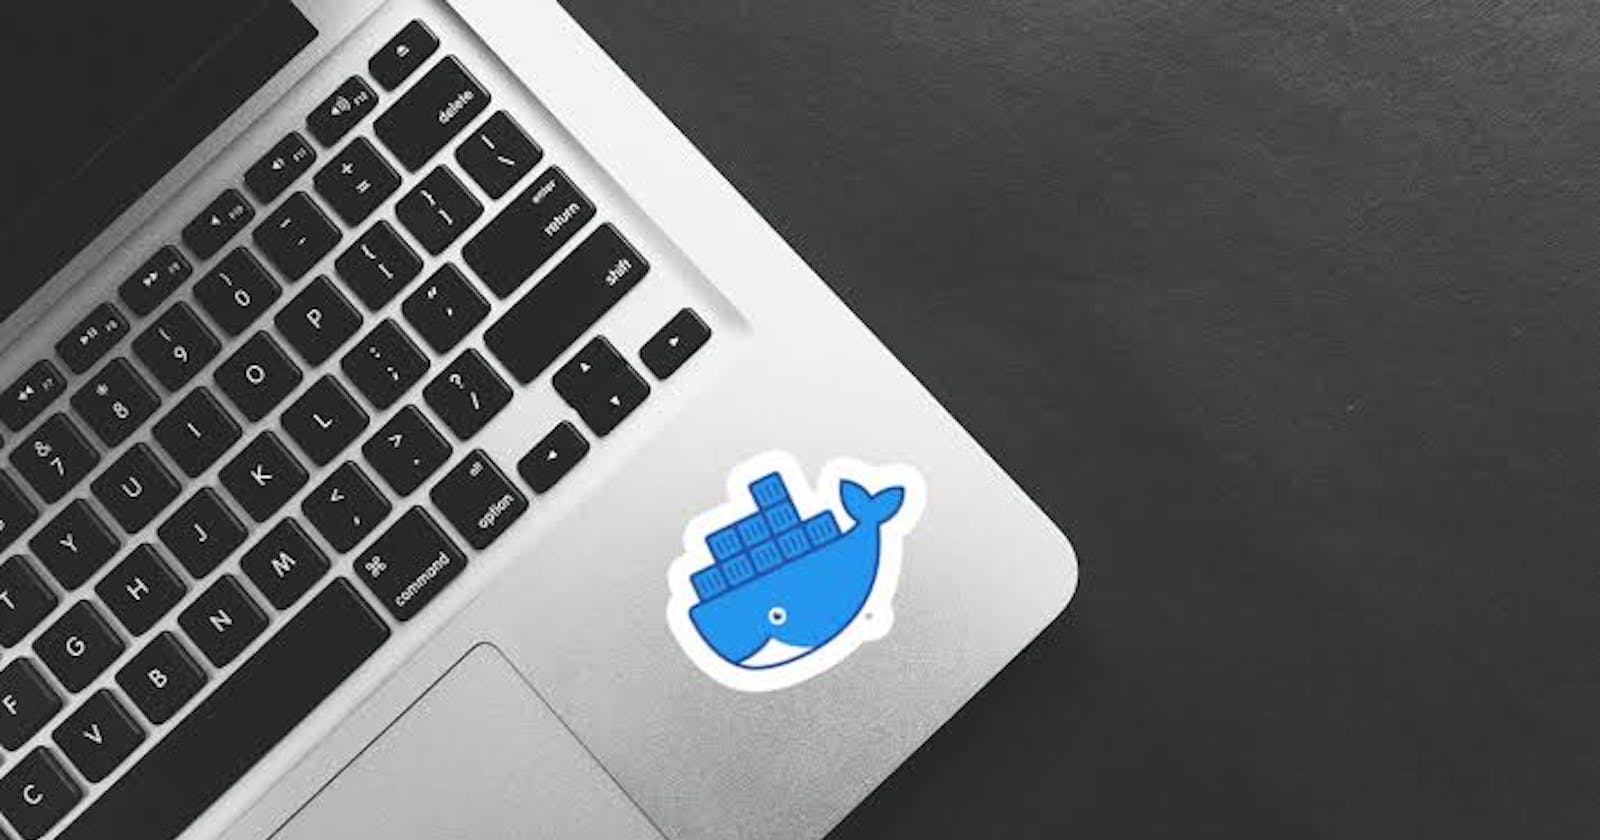 Running Chrome in a docker container on MacOs